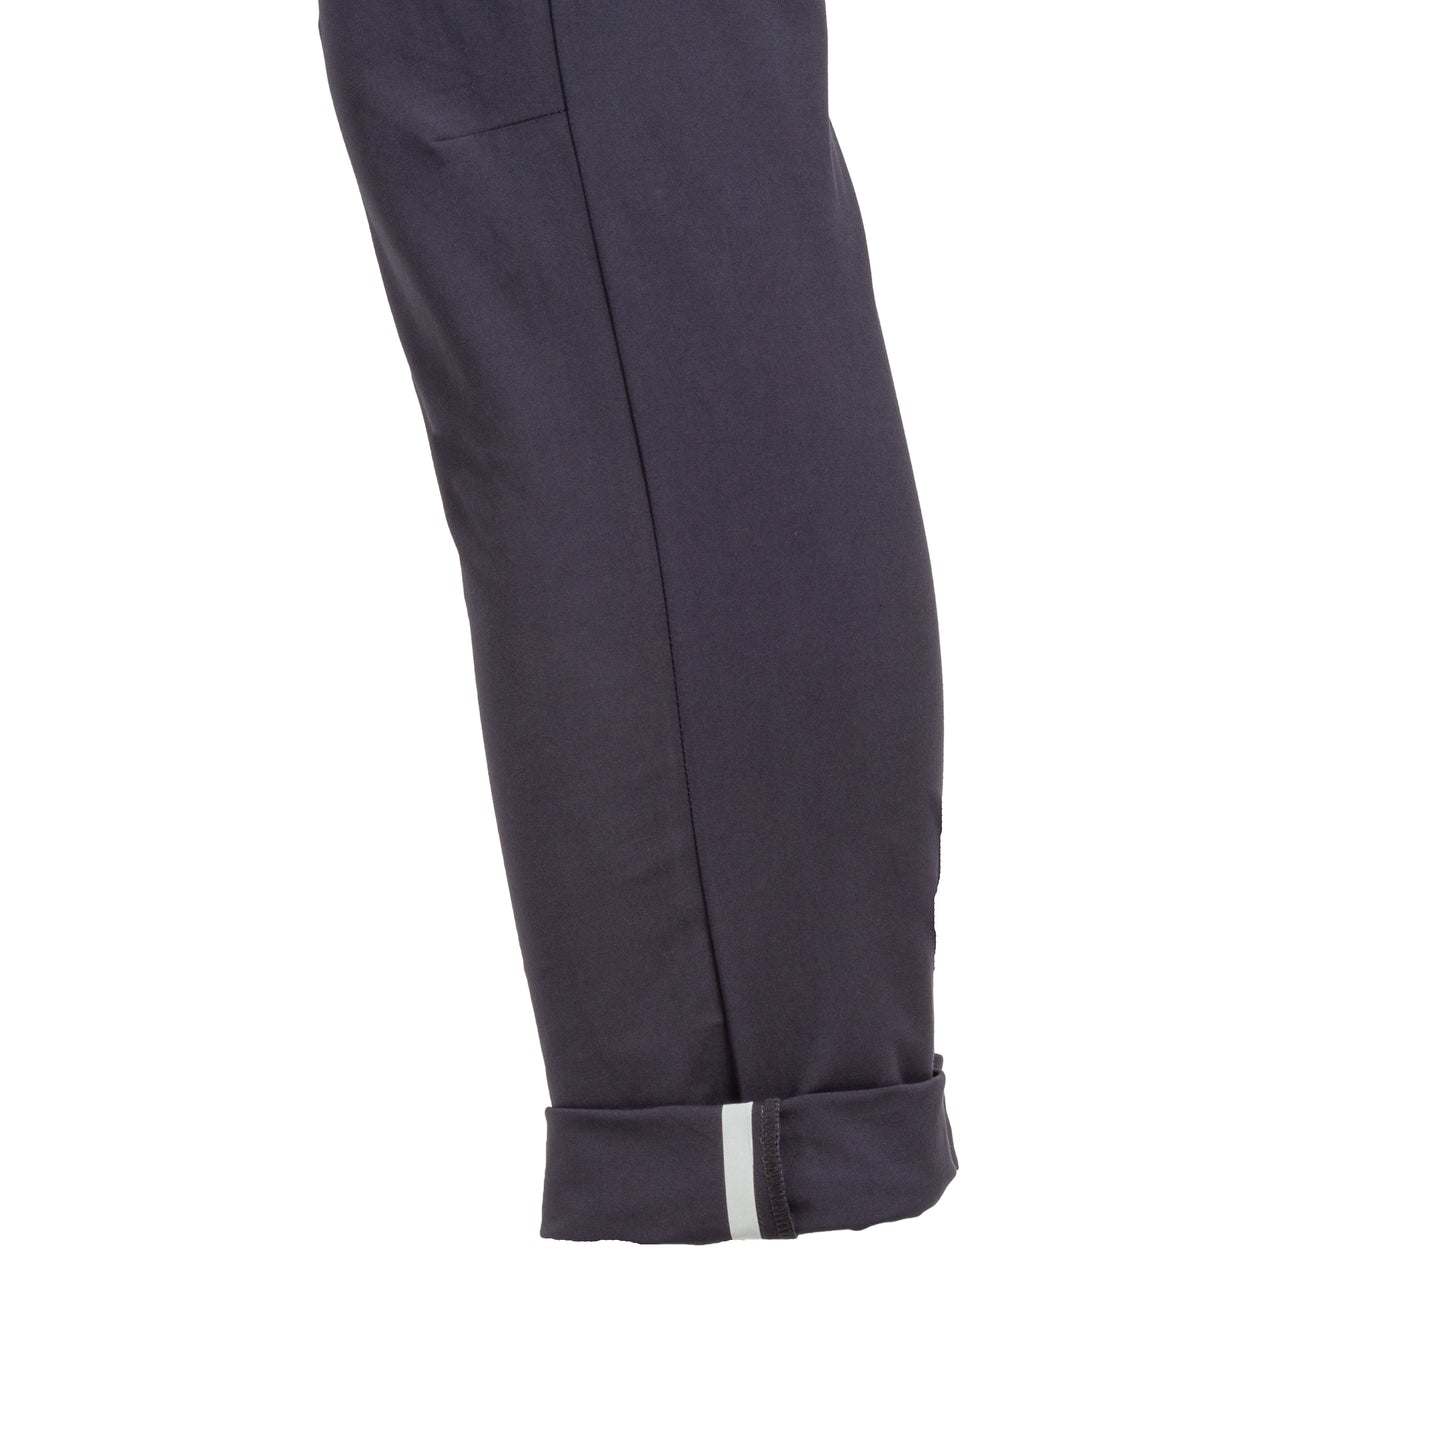 Race Day Pants - Tungsten Blue